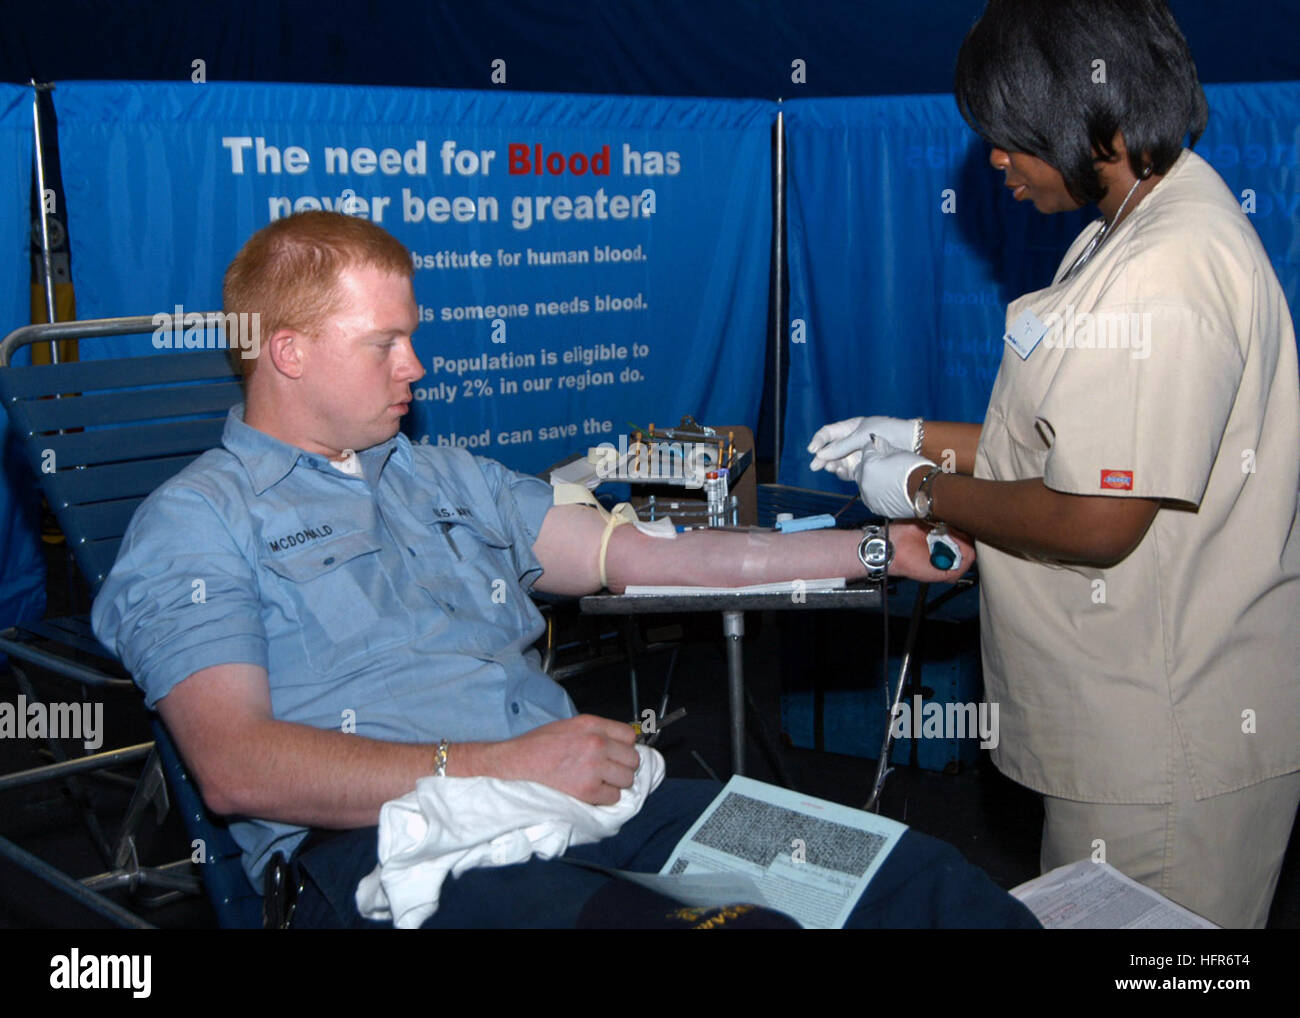 060526-N-7292N-018 New York City (May 26th, 2006) - In the hangar bay aboard the amphibious assault ship USS Kearsarge (LHD 3), a New York City blood center worker, Nitisha Moore takes blood from blood donor Electrician's Mate 3rd Class Jason McDonald. The blood drive is one of several community-relations projects, which Kearsarge and her crew are participating in during Fleet Week 2006. U.S. Navy photo by Mass Communications Specialist Christen Nicholas (RELEASED) US Navy 060526-N-7292N-018 In the hangar bay aboard the amphibious assault ship USS Kearsarge (LHD 3), a New York City blood cente Stock Photo